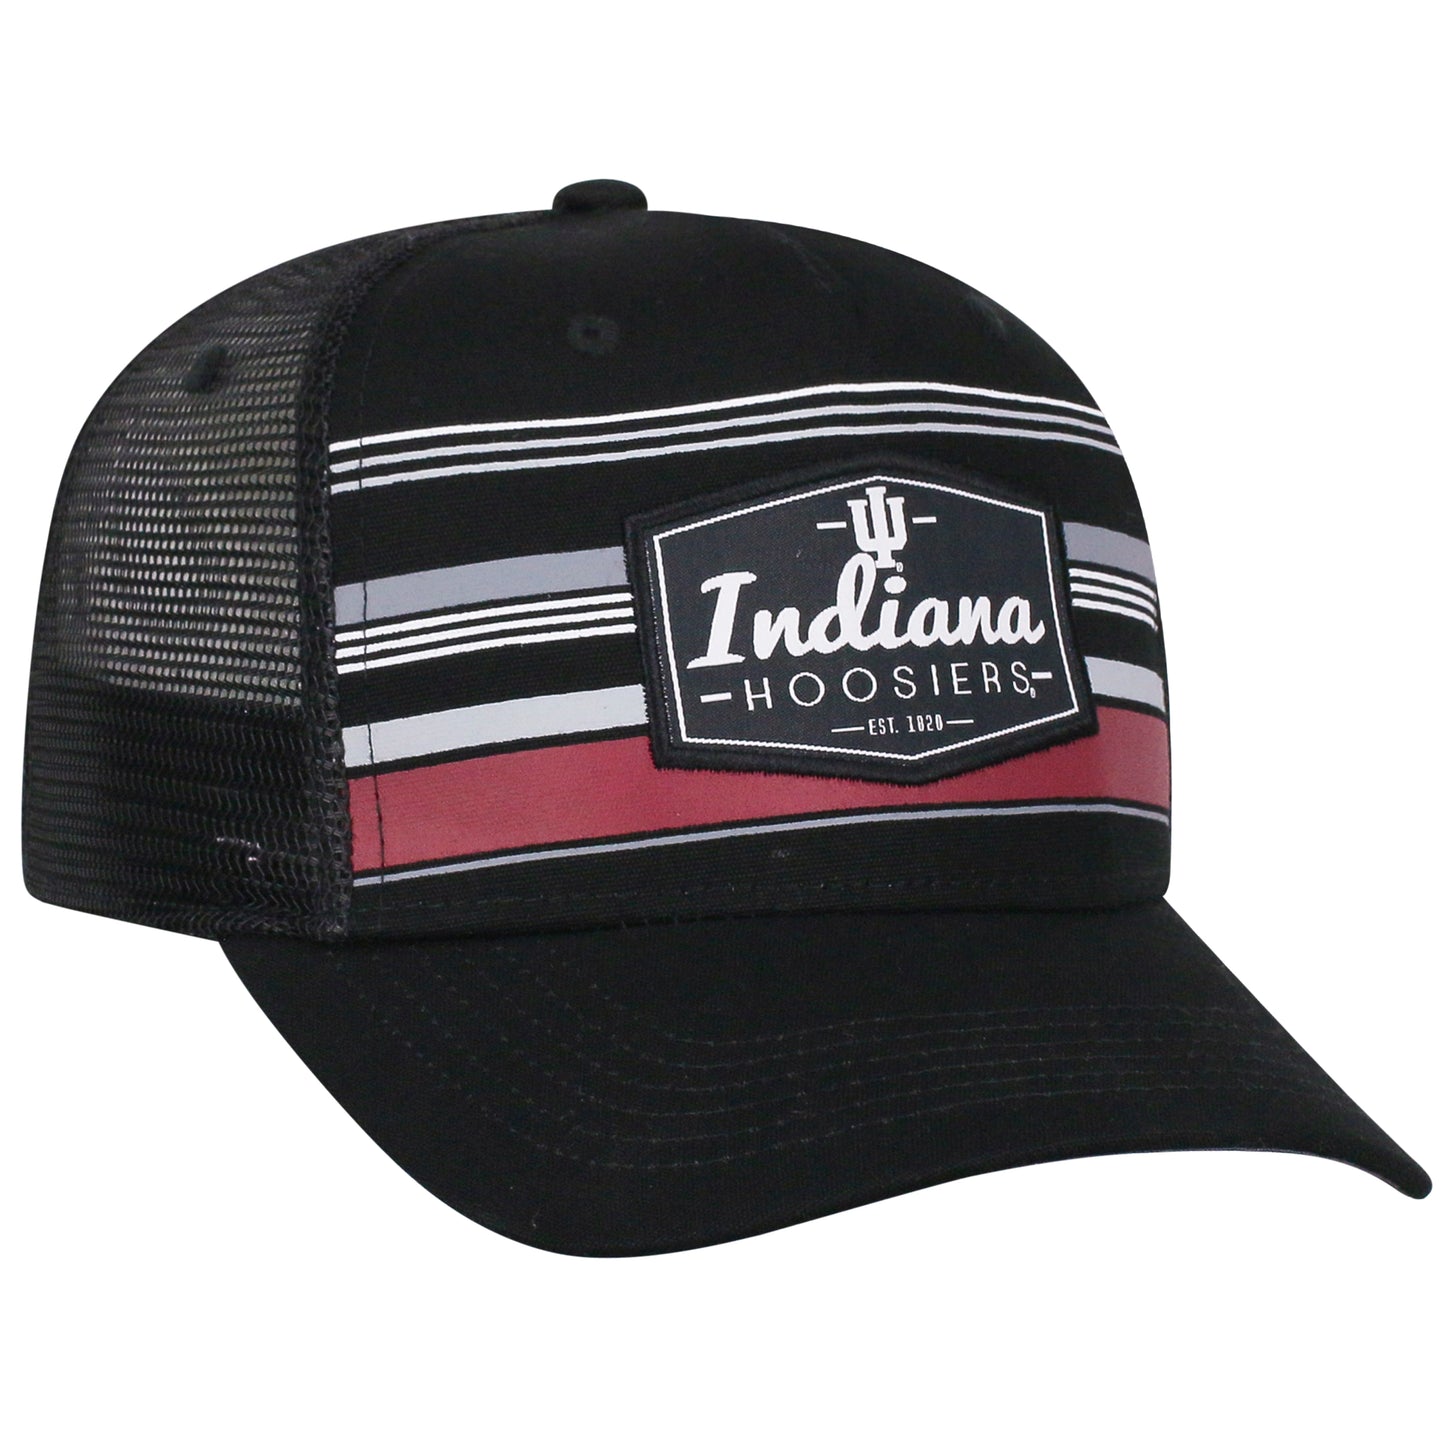 Mens Indiana Hoosiers Route Adjustable Hat By Top Of The World